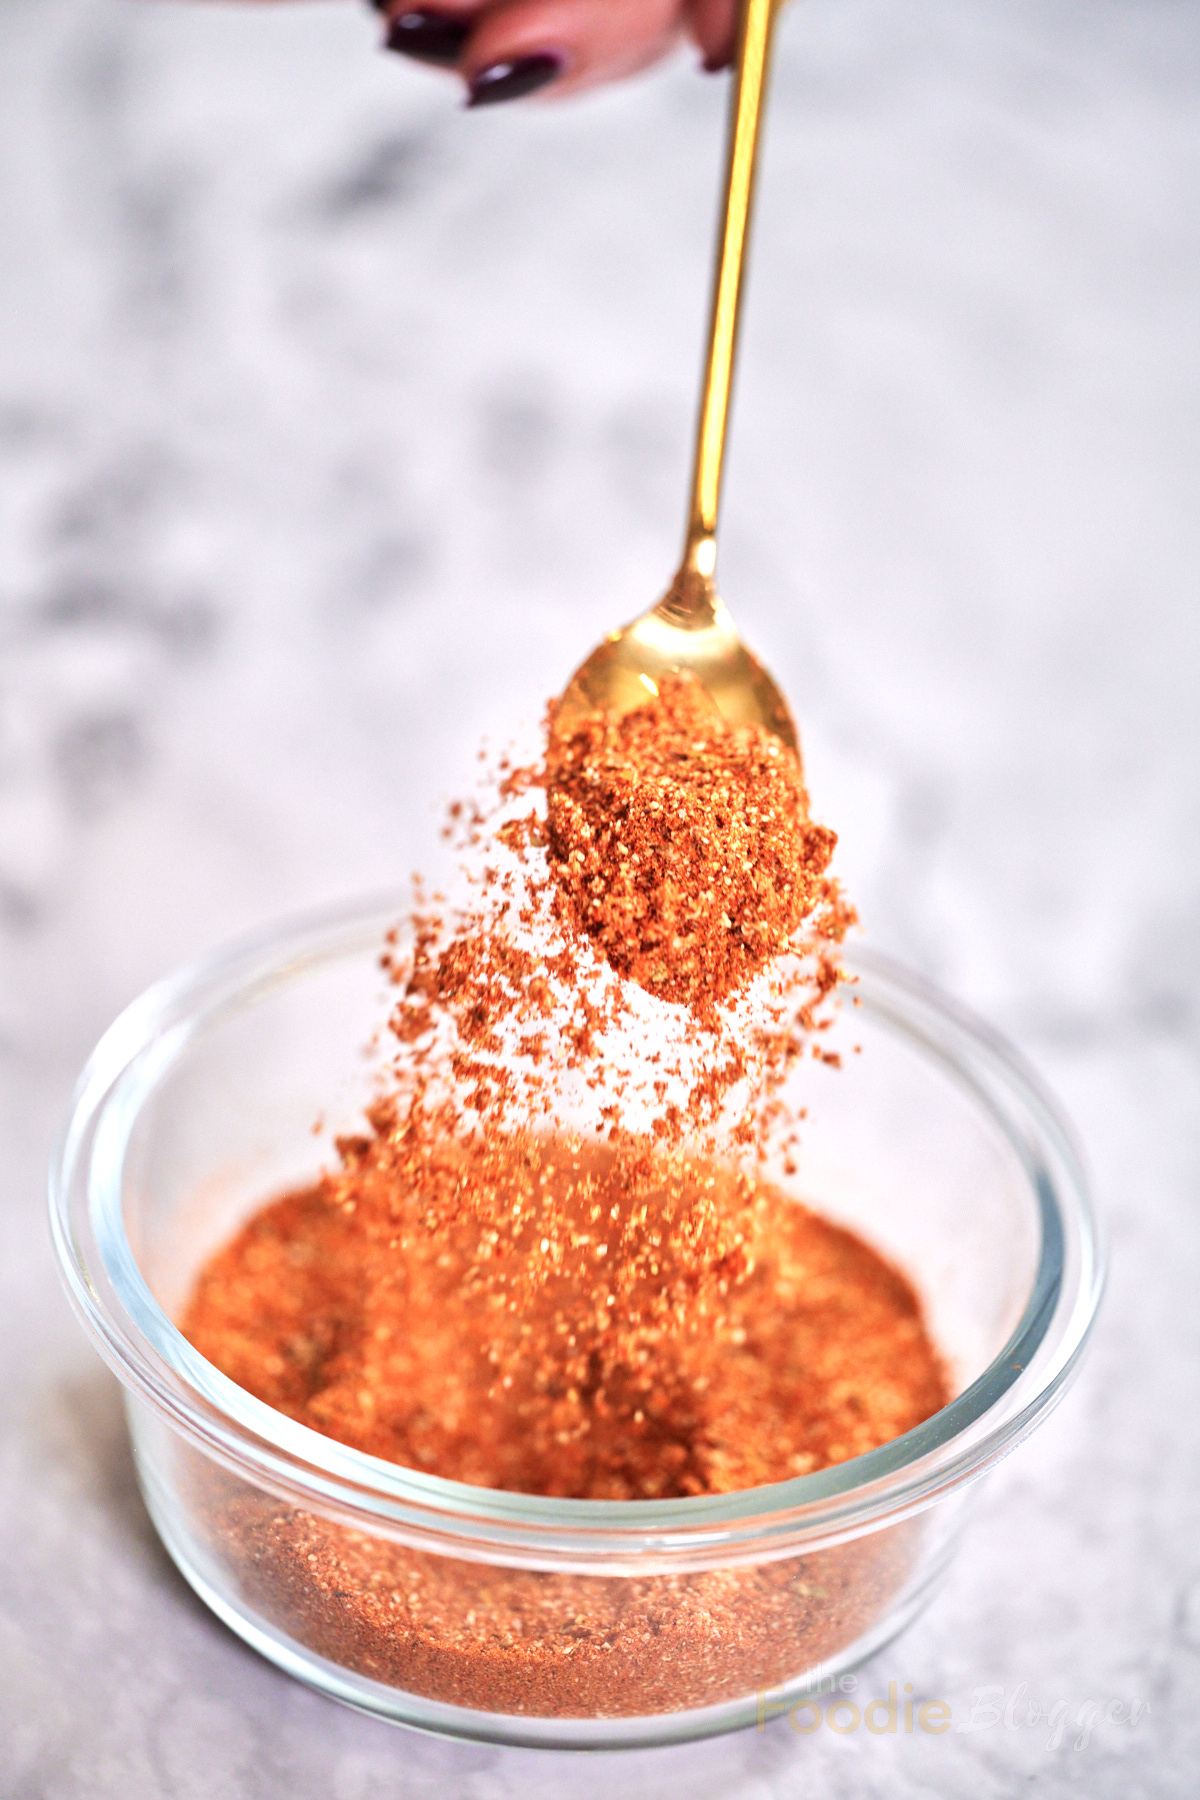 thefoodieblogger homemade taco seasoning blend in a spoon